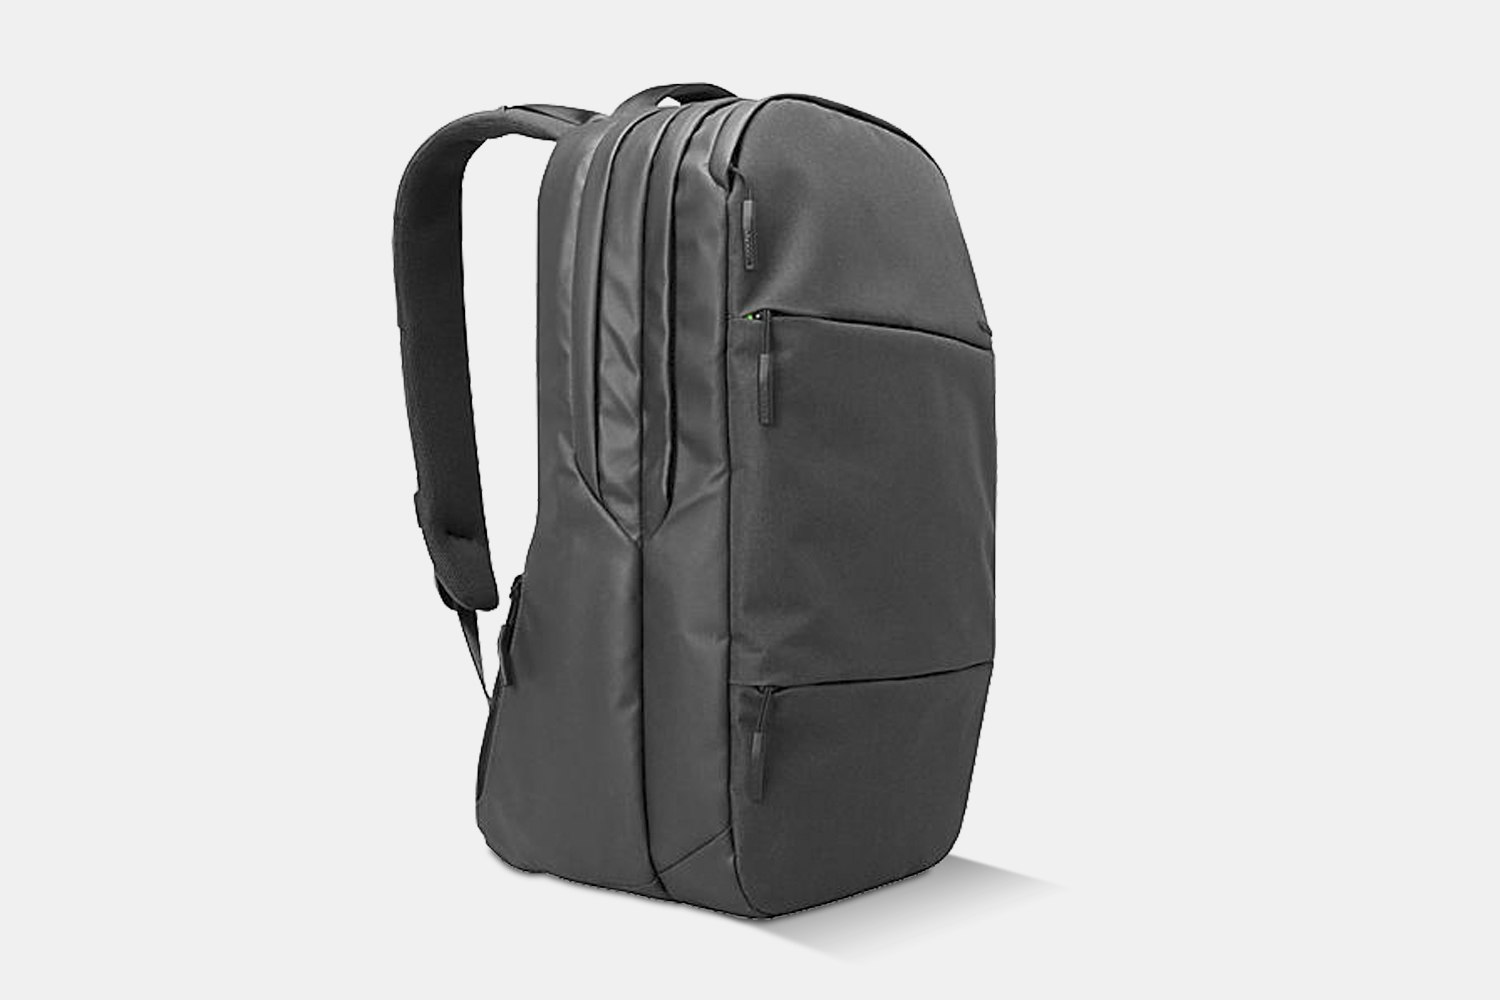 InCase ICON Backpack Review: Carry the Weight of the World